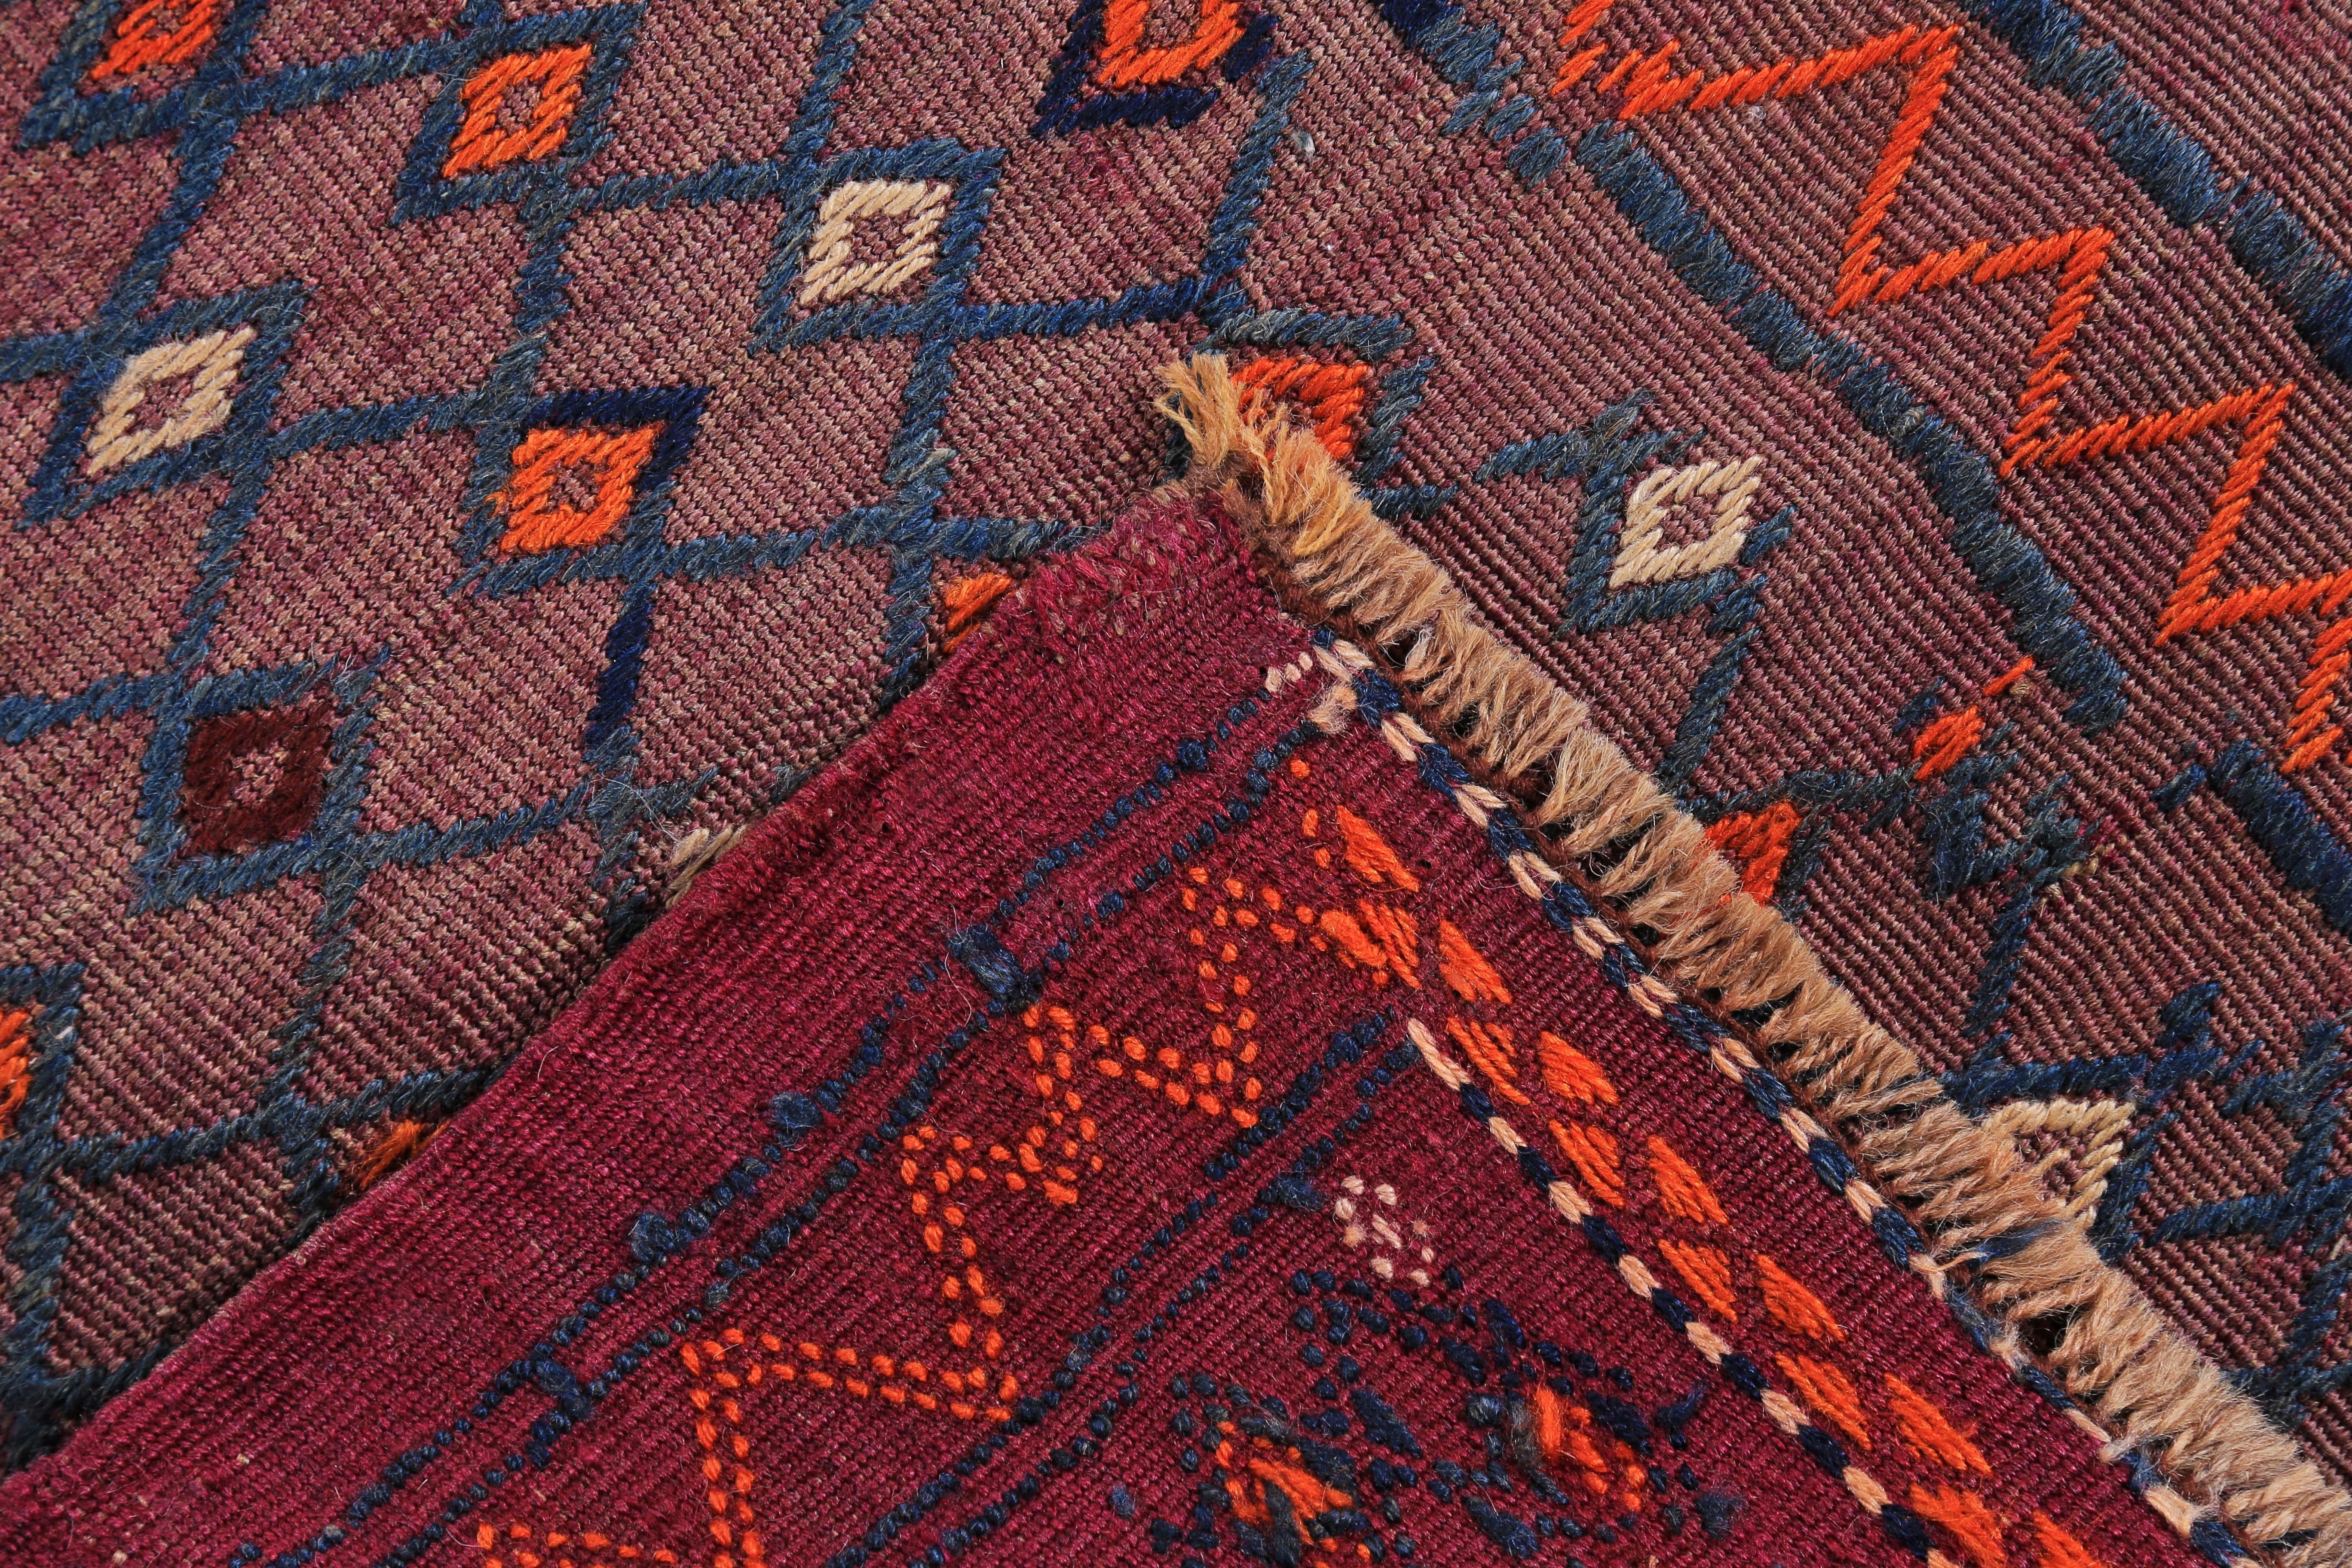 Contemporary Modern Turkish Kilim Rug with Navy and Orange Tribal Design on Red Field